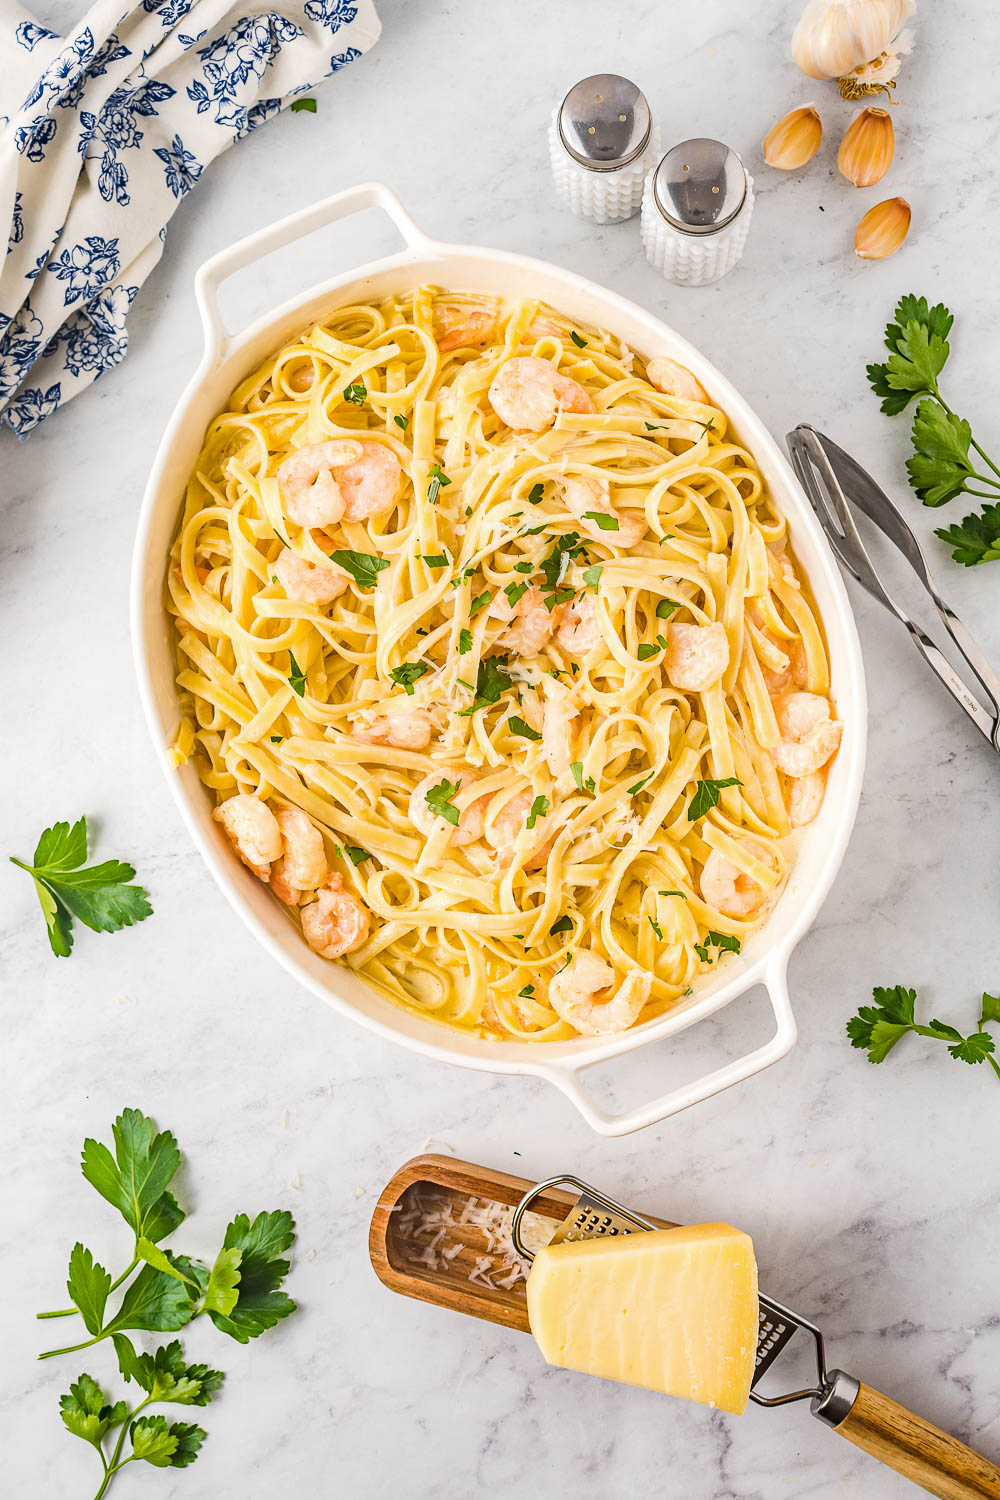 A dish of pasta with shrimp and parsley.